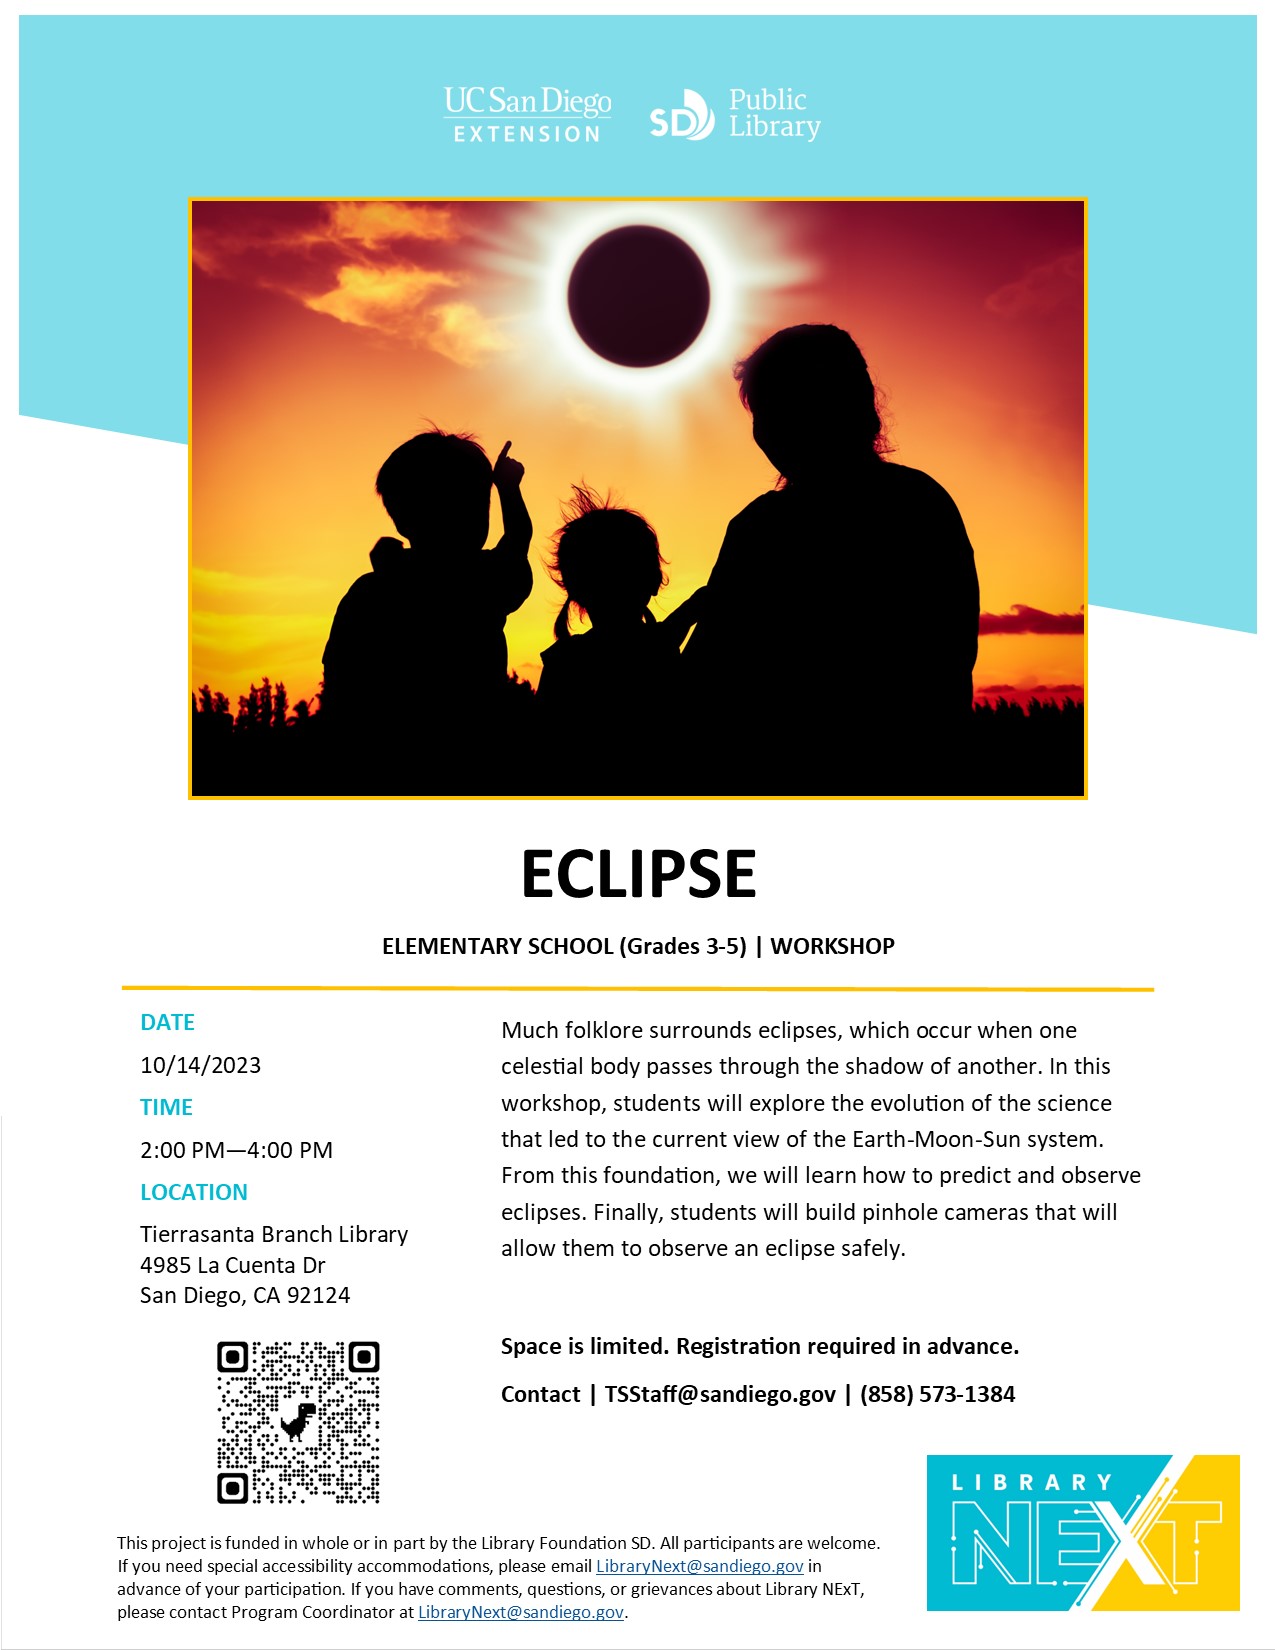 flyer with image of children playing during an annular solar eclipse